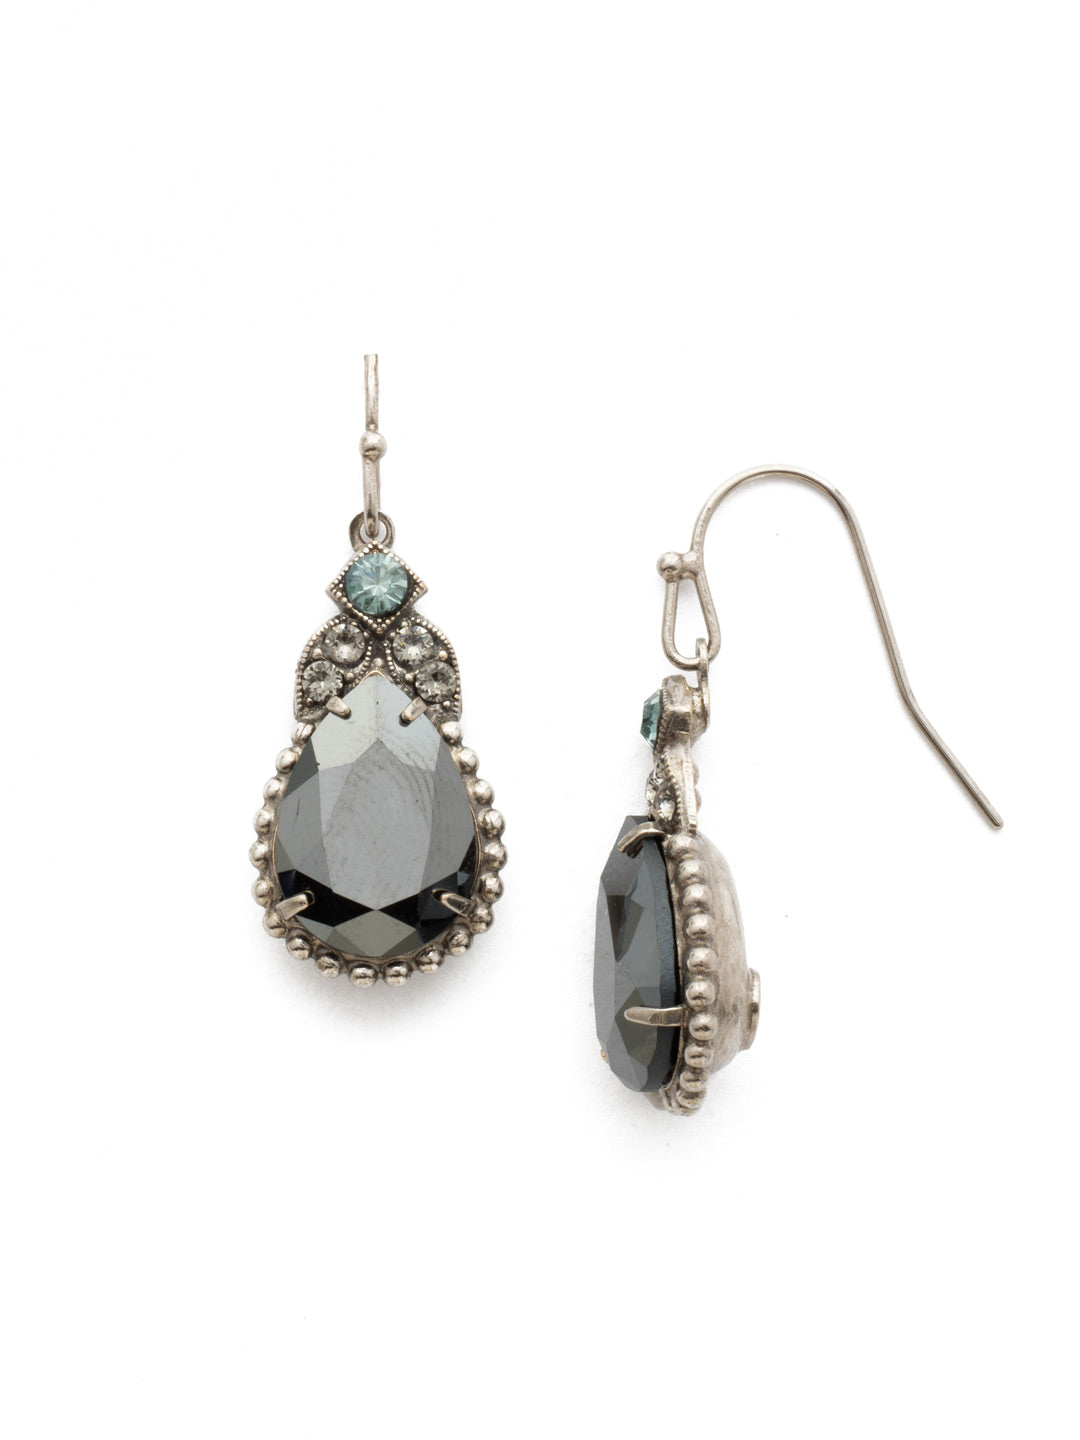 Decorative Deco Dangle Earrings - EDP22ASBON - A embellished pear cut crystal sits beneath a deco-inspired design for a dazzling look that works for any occasion. From Sorrelli's Black Onyx collection in our Antique Silver-tone finish.